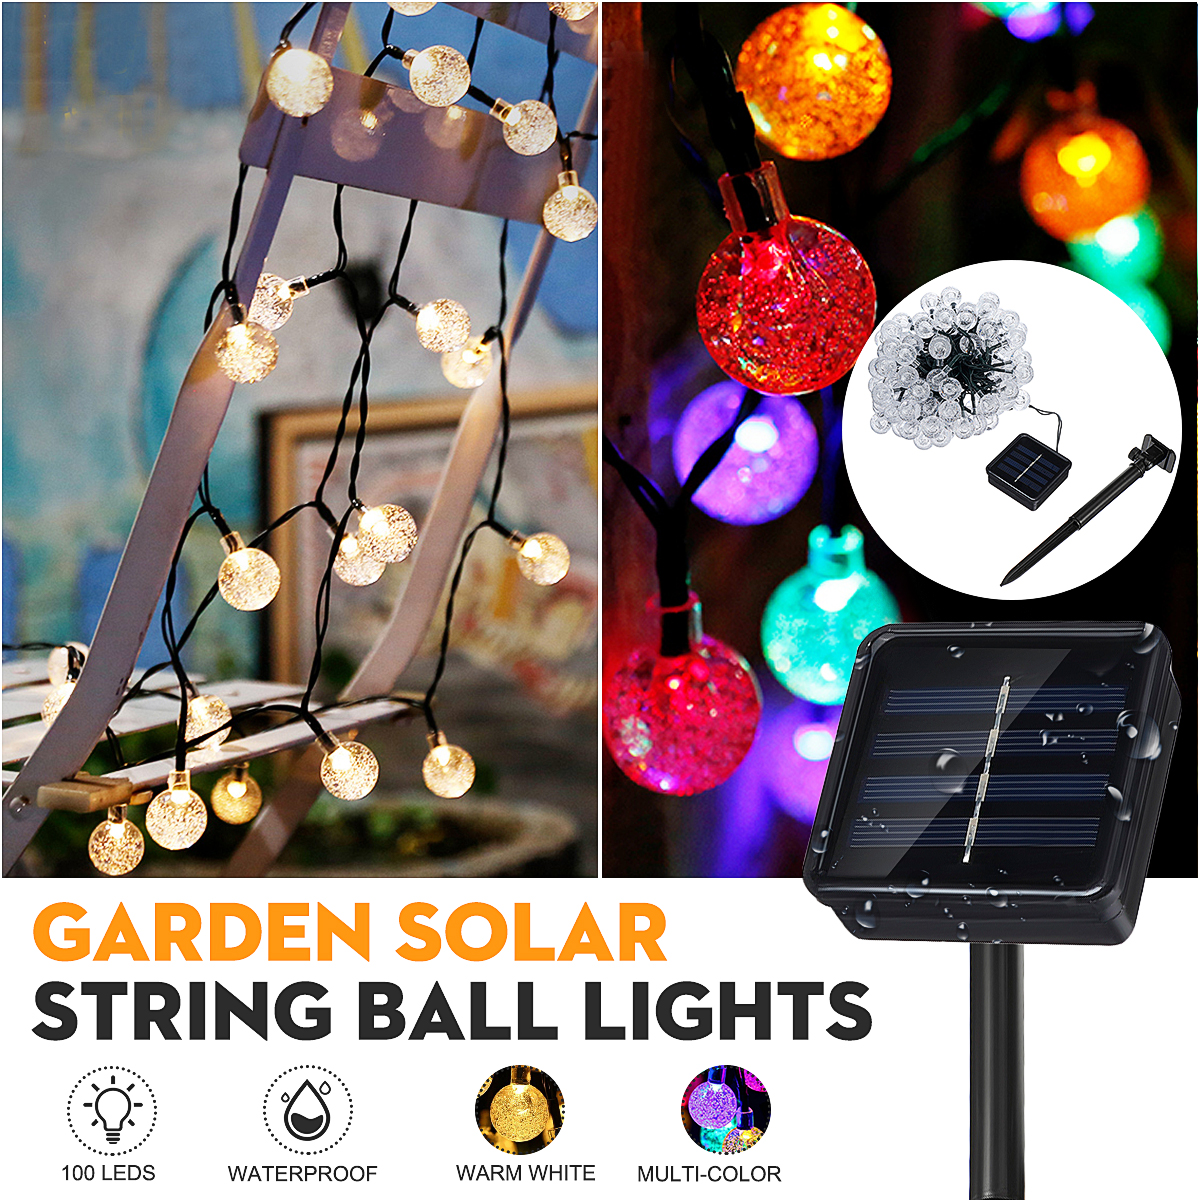 65M-30-LED-Solar-String-Ball-Lights-Outdoor-Waterproof-Warm-White-Garden-Christmas-Tree-Decorations--1672120-1